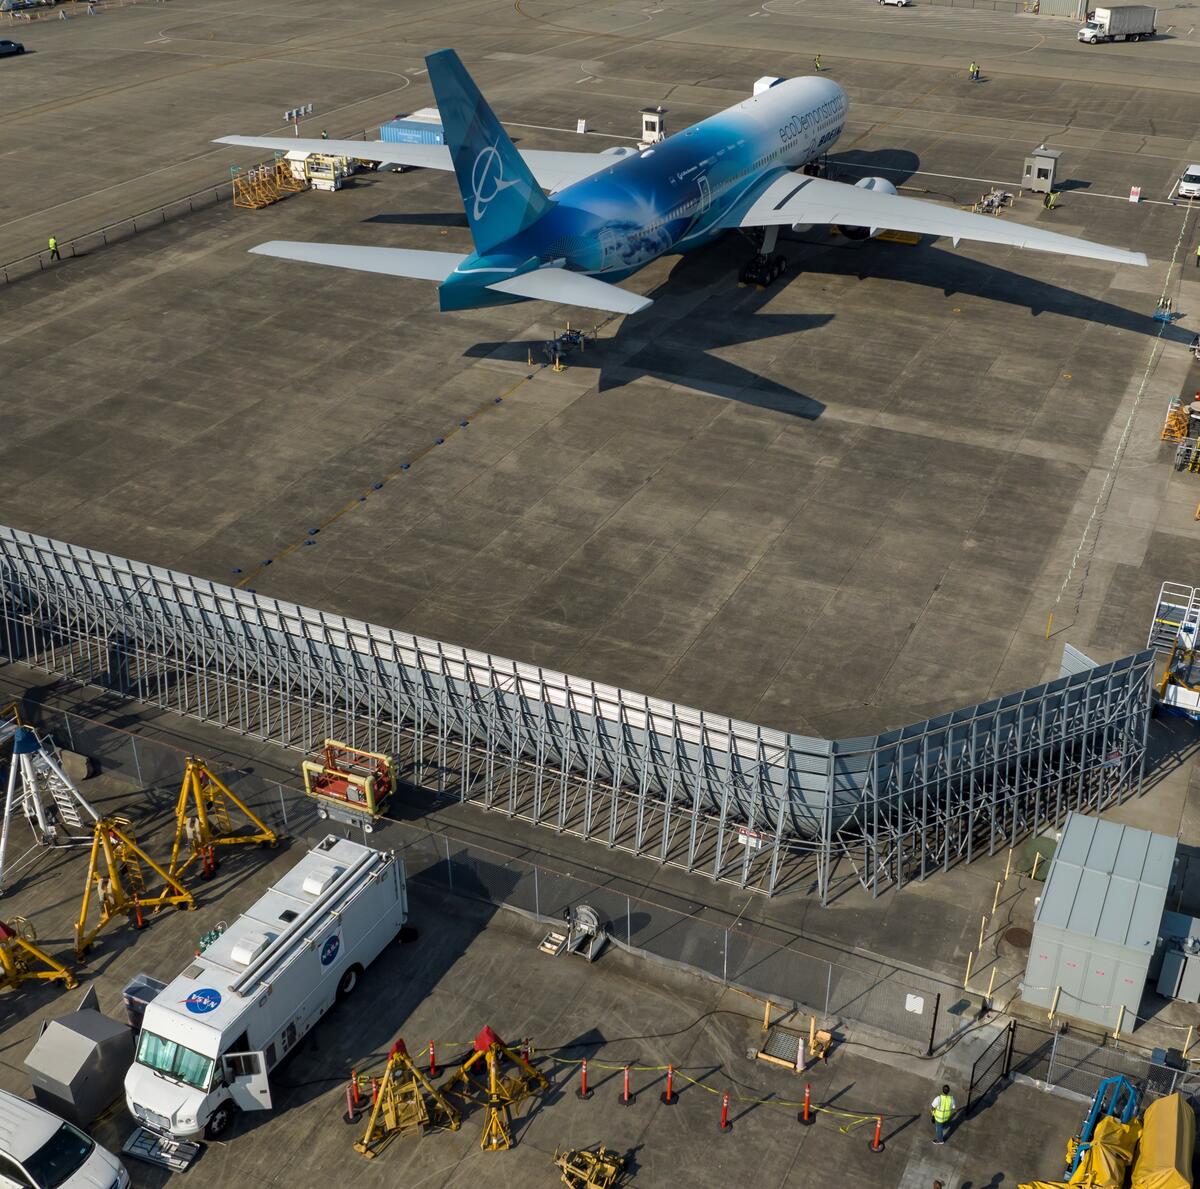 The Boeing ecoDemonstrator 777-200 WB212, sits on the test section at Paine Field while the NASA Langley Mobile Laboratory parks behind the blast wall.